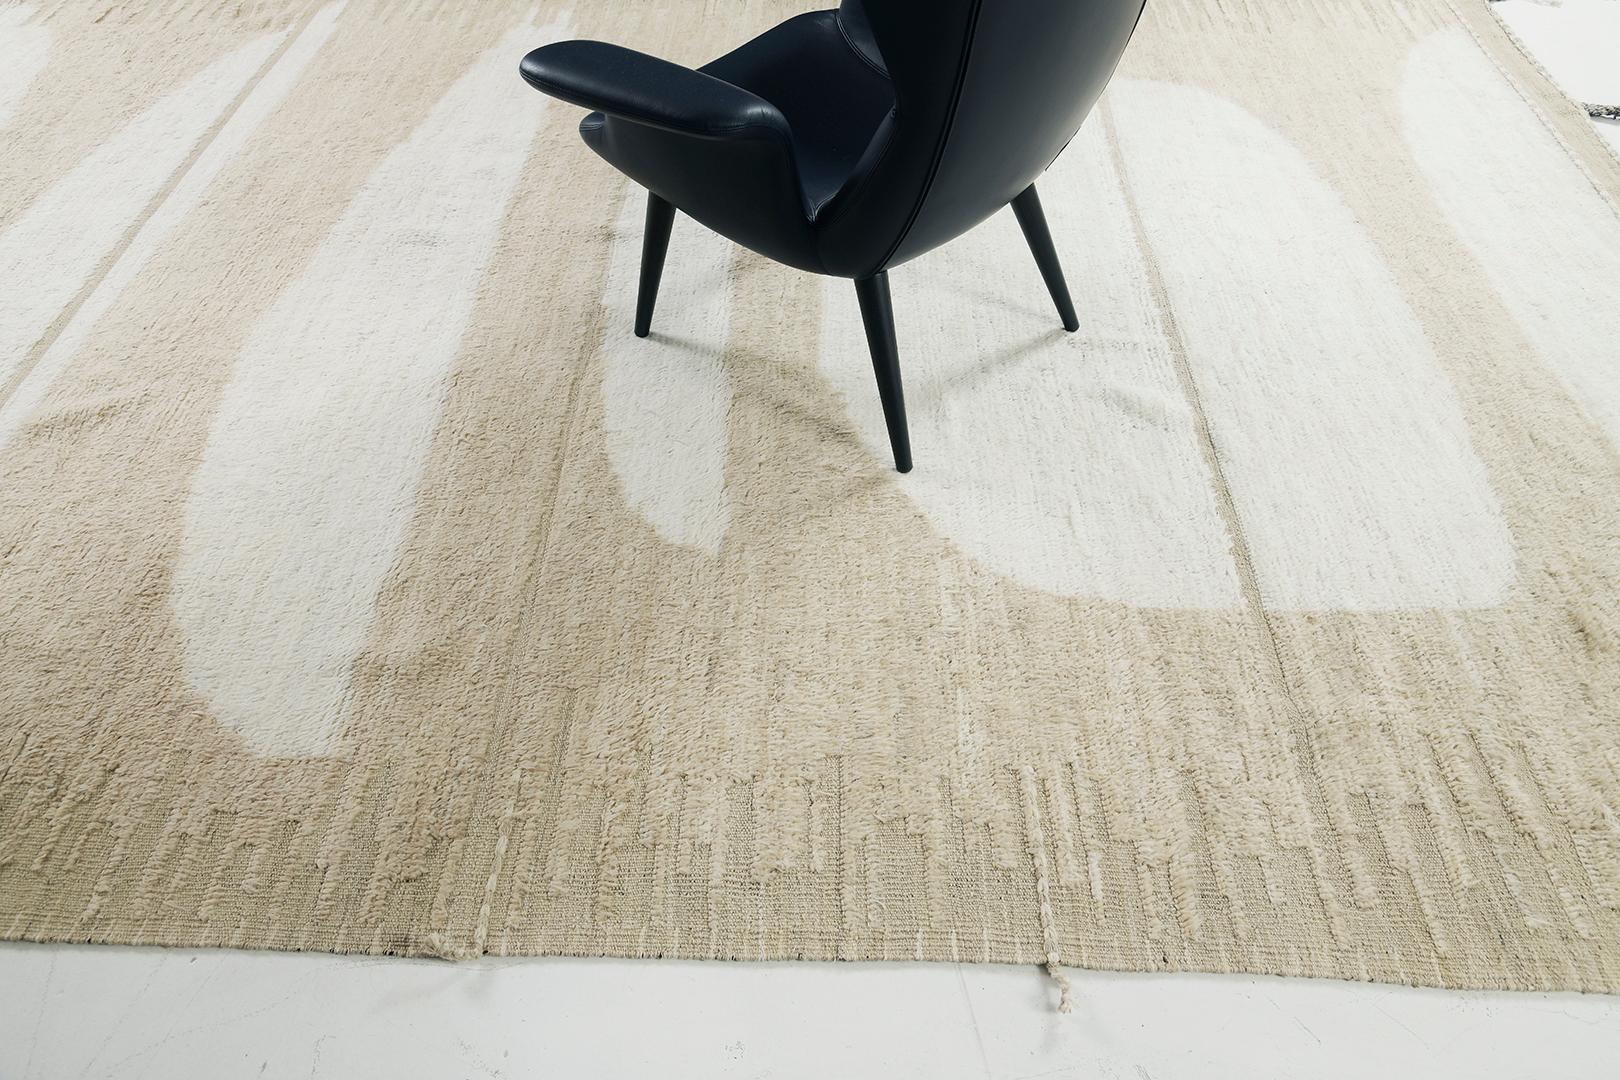 Baddis’ displays fascinating elements featured along the khaki field that enhances the soothing character of this enchanting rug. This remarkable rug exhibits sophistication along its captivating minimalism. Mehraban's Atlas collection is noted for